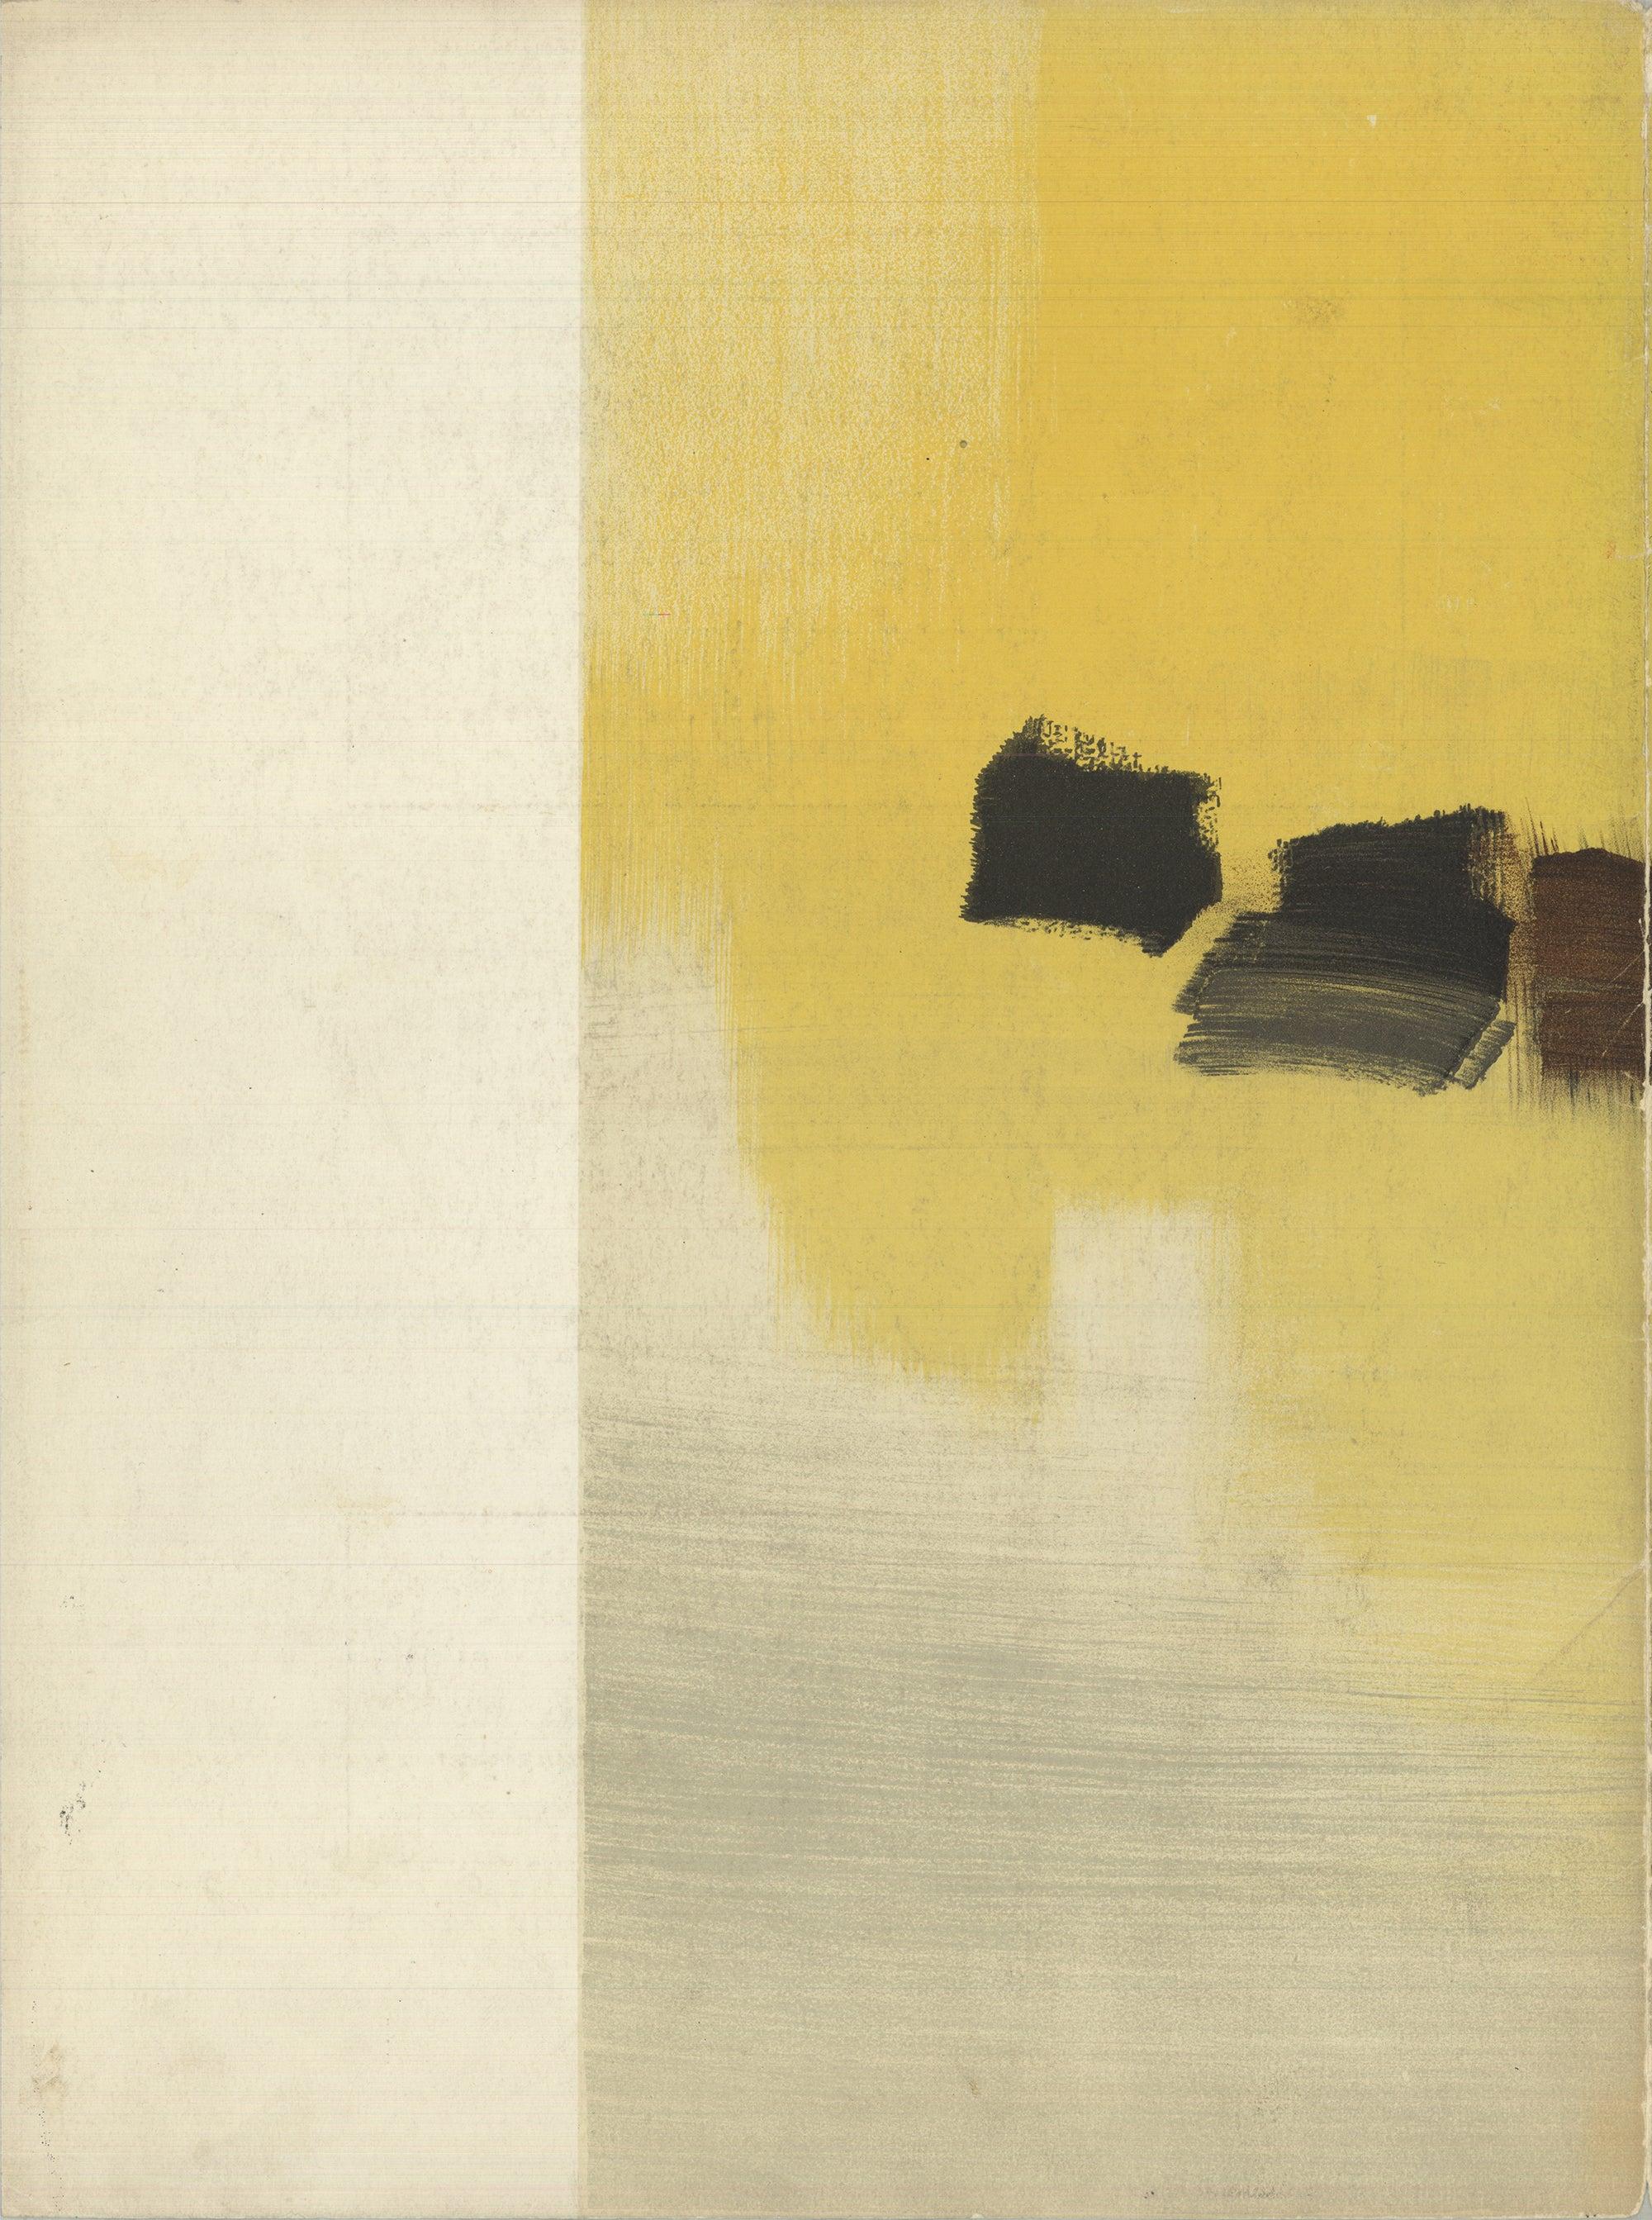 1959 Pierre Tal-Coat 'Derriere Le Miroir, no. 114 Cover' Abstract Yellow, Black  For Sale 2